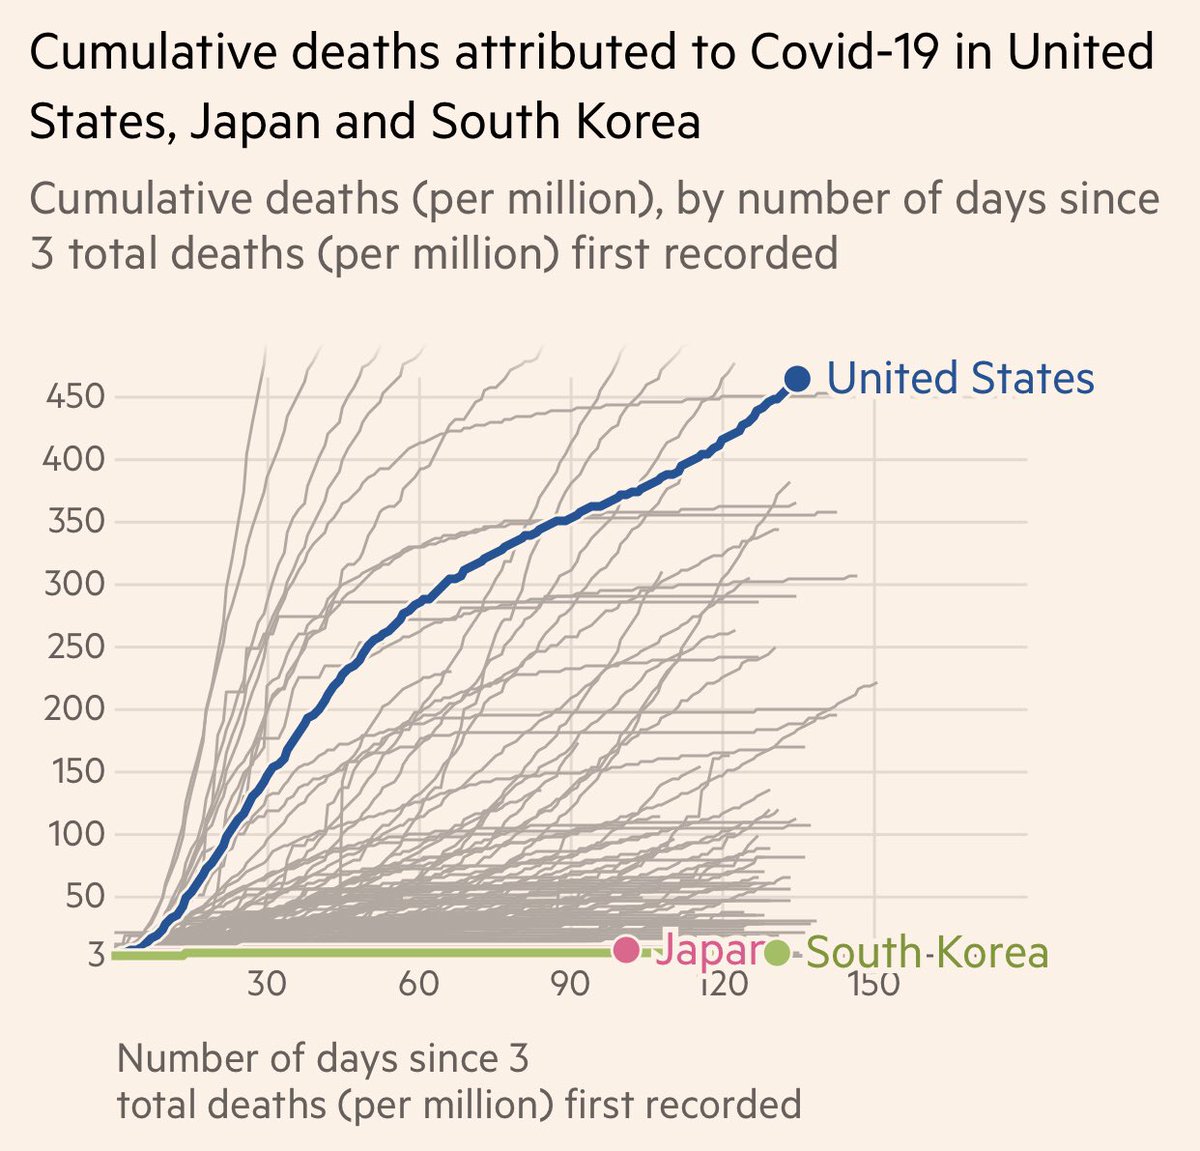 I’m not even comparing us to Asian countries like S. Korea or Japan who have 6 to 8 deaths per million. If we were to have performed like them, we would have >95% fewer deaths. So my estimate of >70% preventable deaths is conservative. 4/